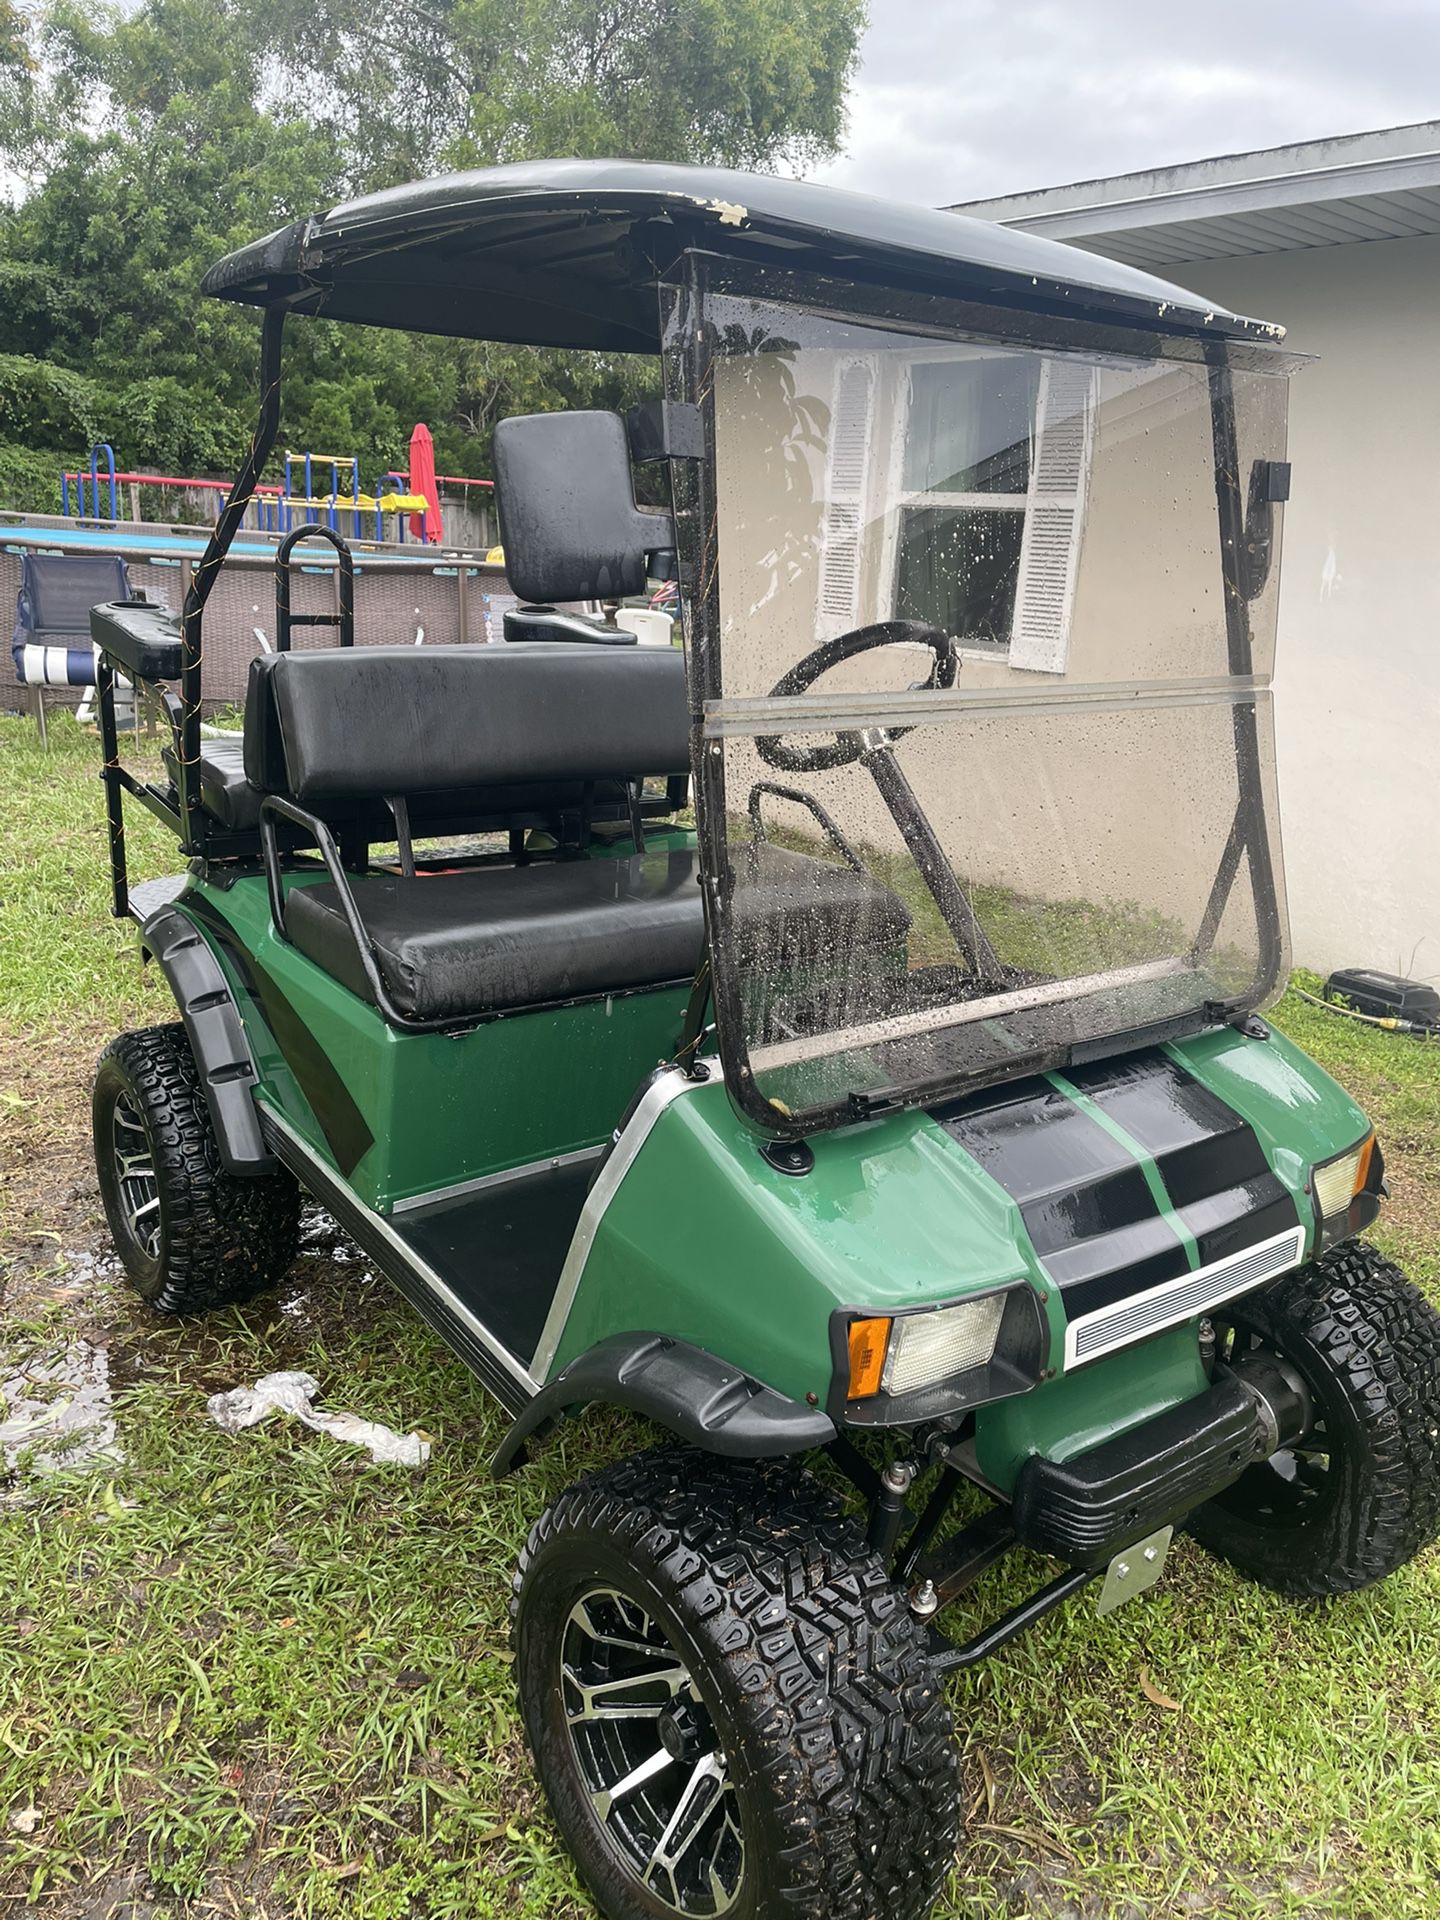 Gas Club Car for Sale in Port St. Lucie, FL - OfferUp